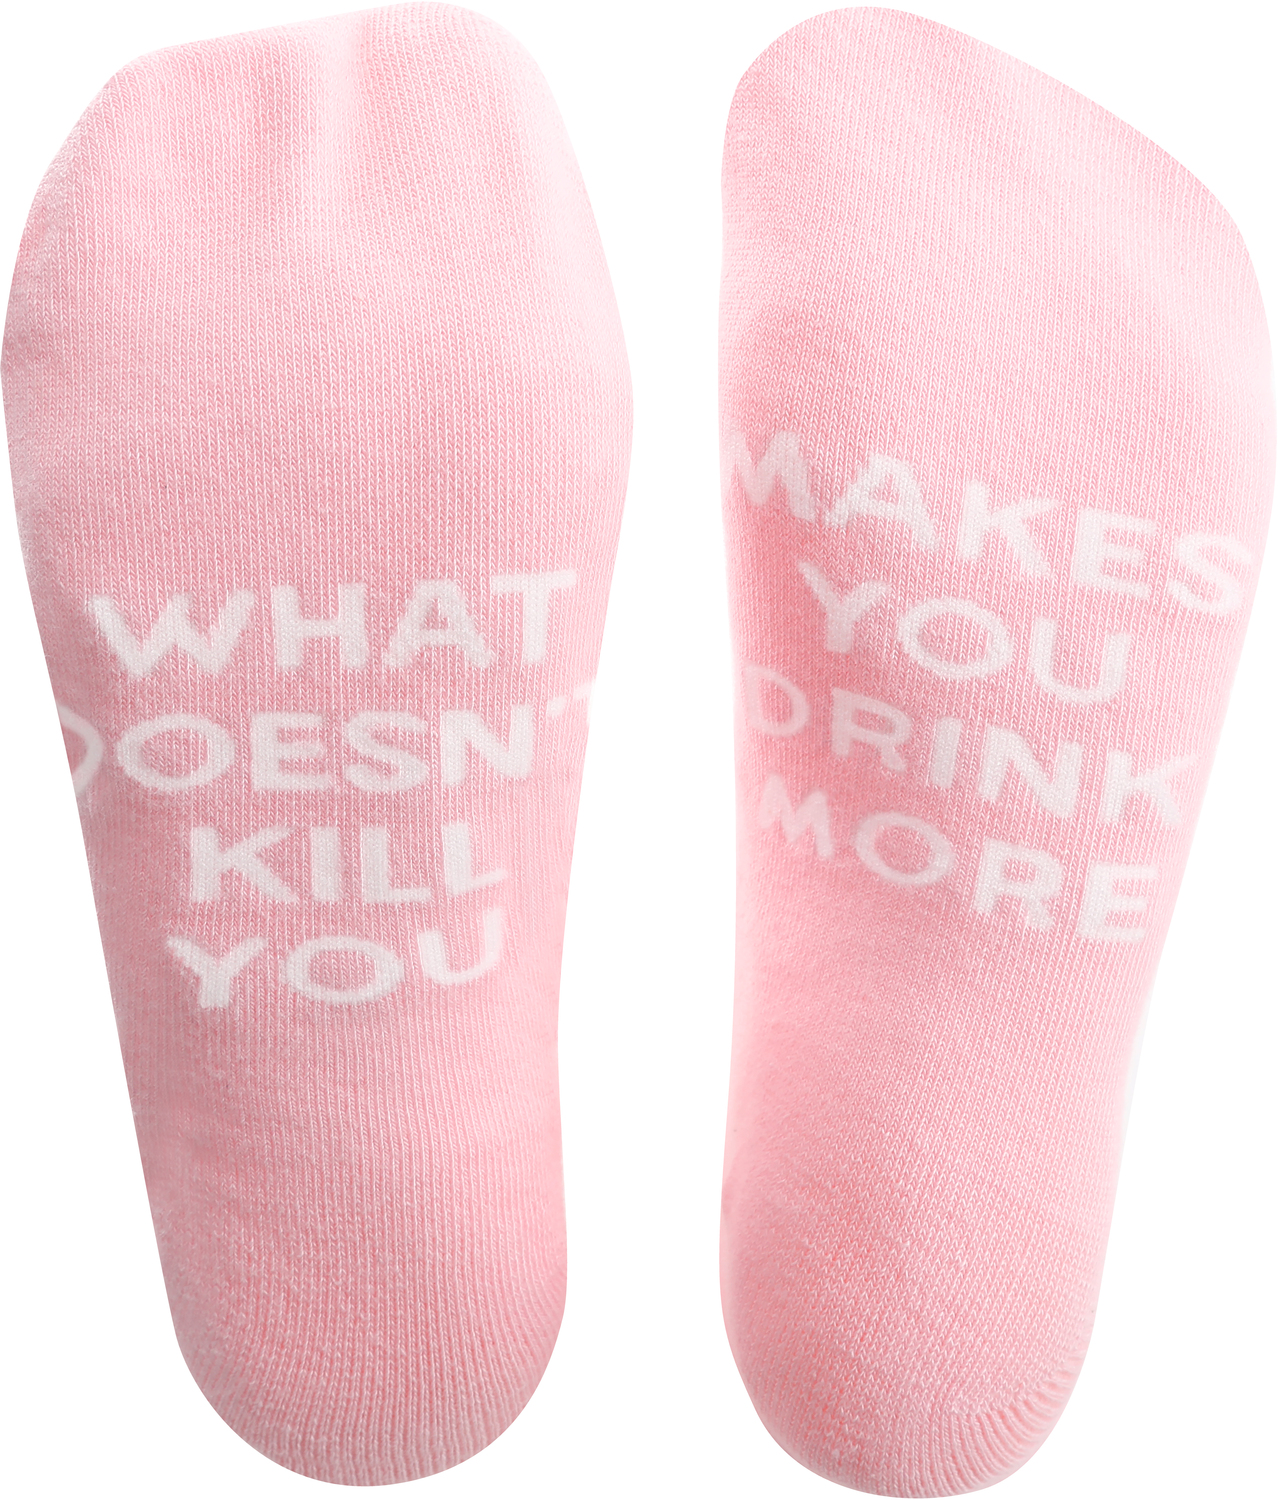 Drink More by Mom Life - Drink More - Ladies Cotton Blend Sock